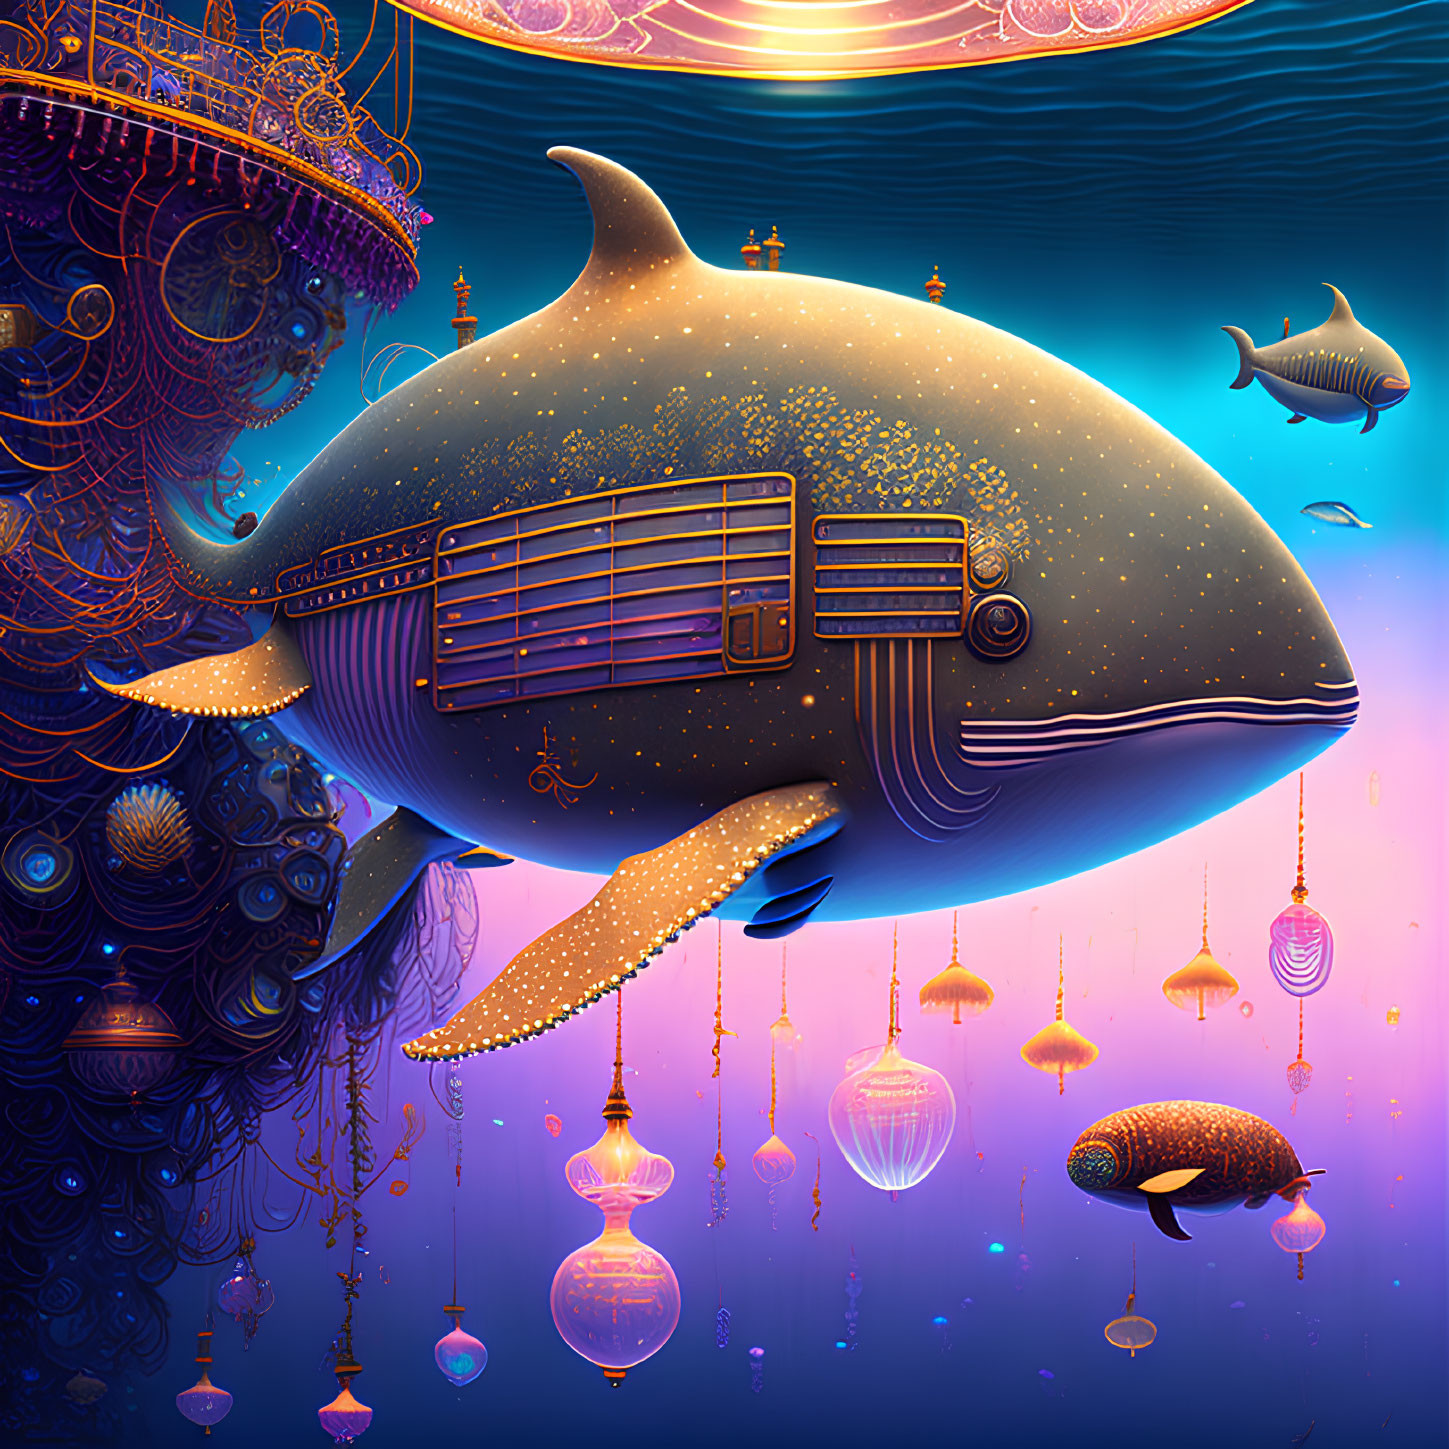 Whale-themed surreal artwork with building-like structures and vibrant colors